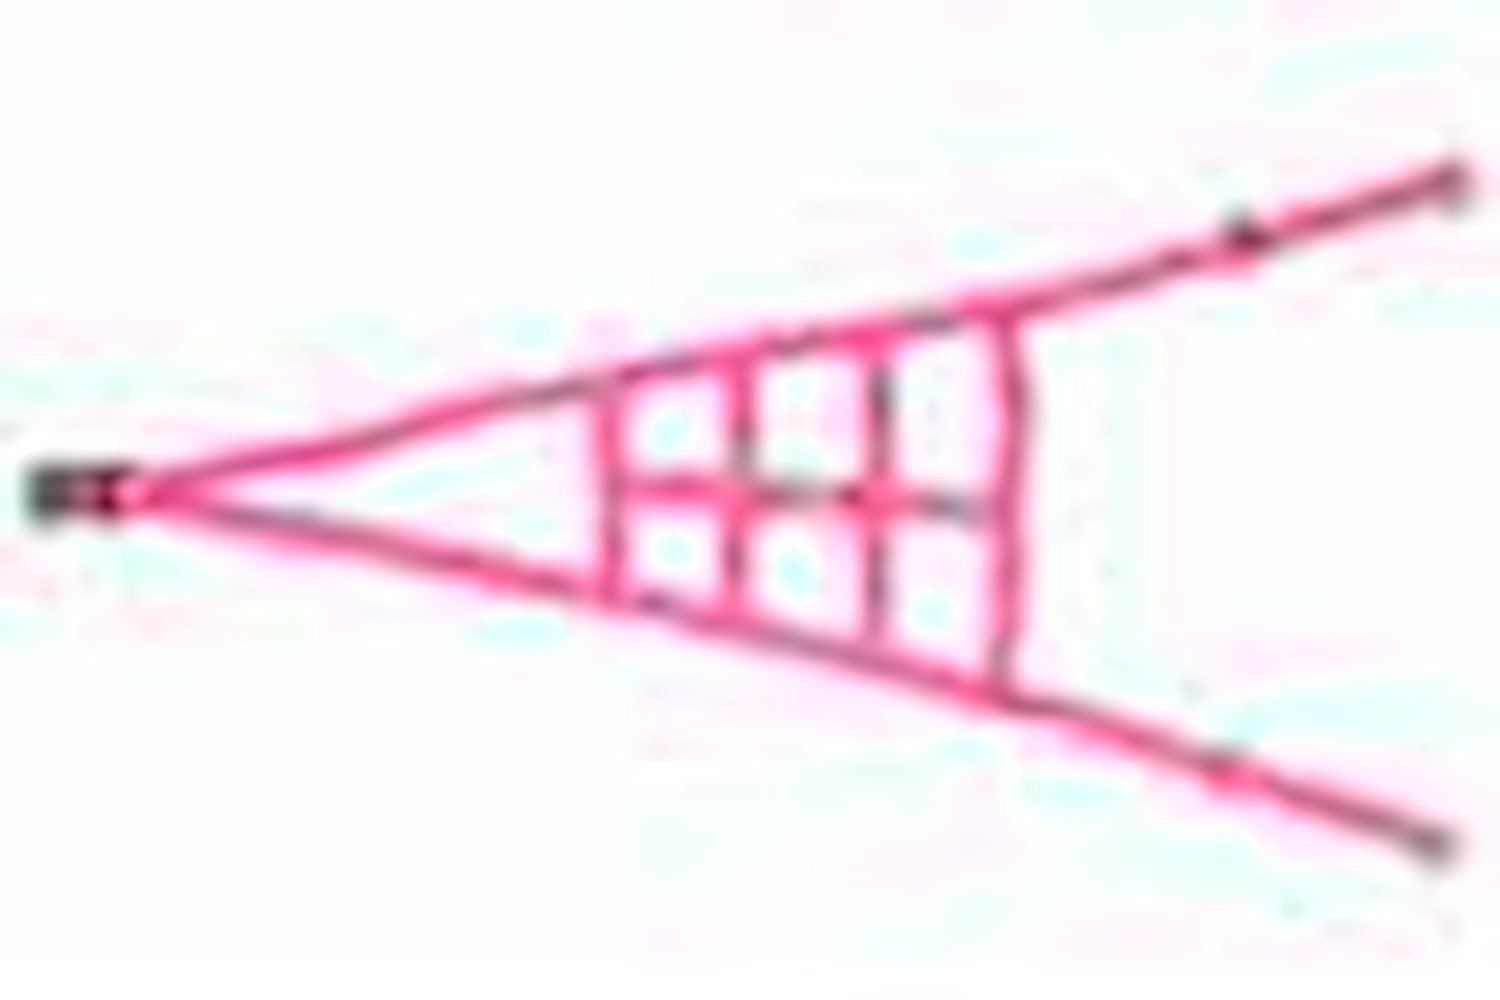 Ribbon ROLL CAGE Net 2 Point NON-SFI HOT PINK